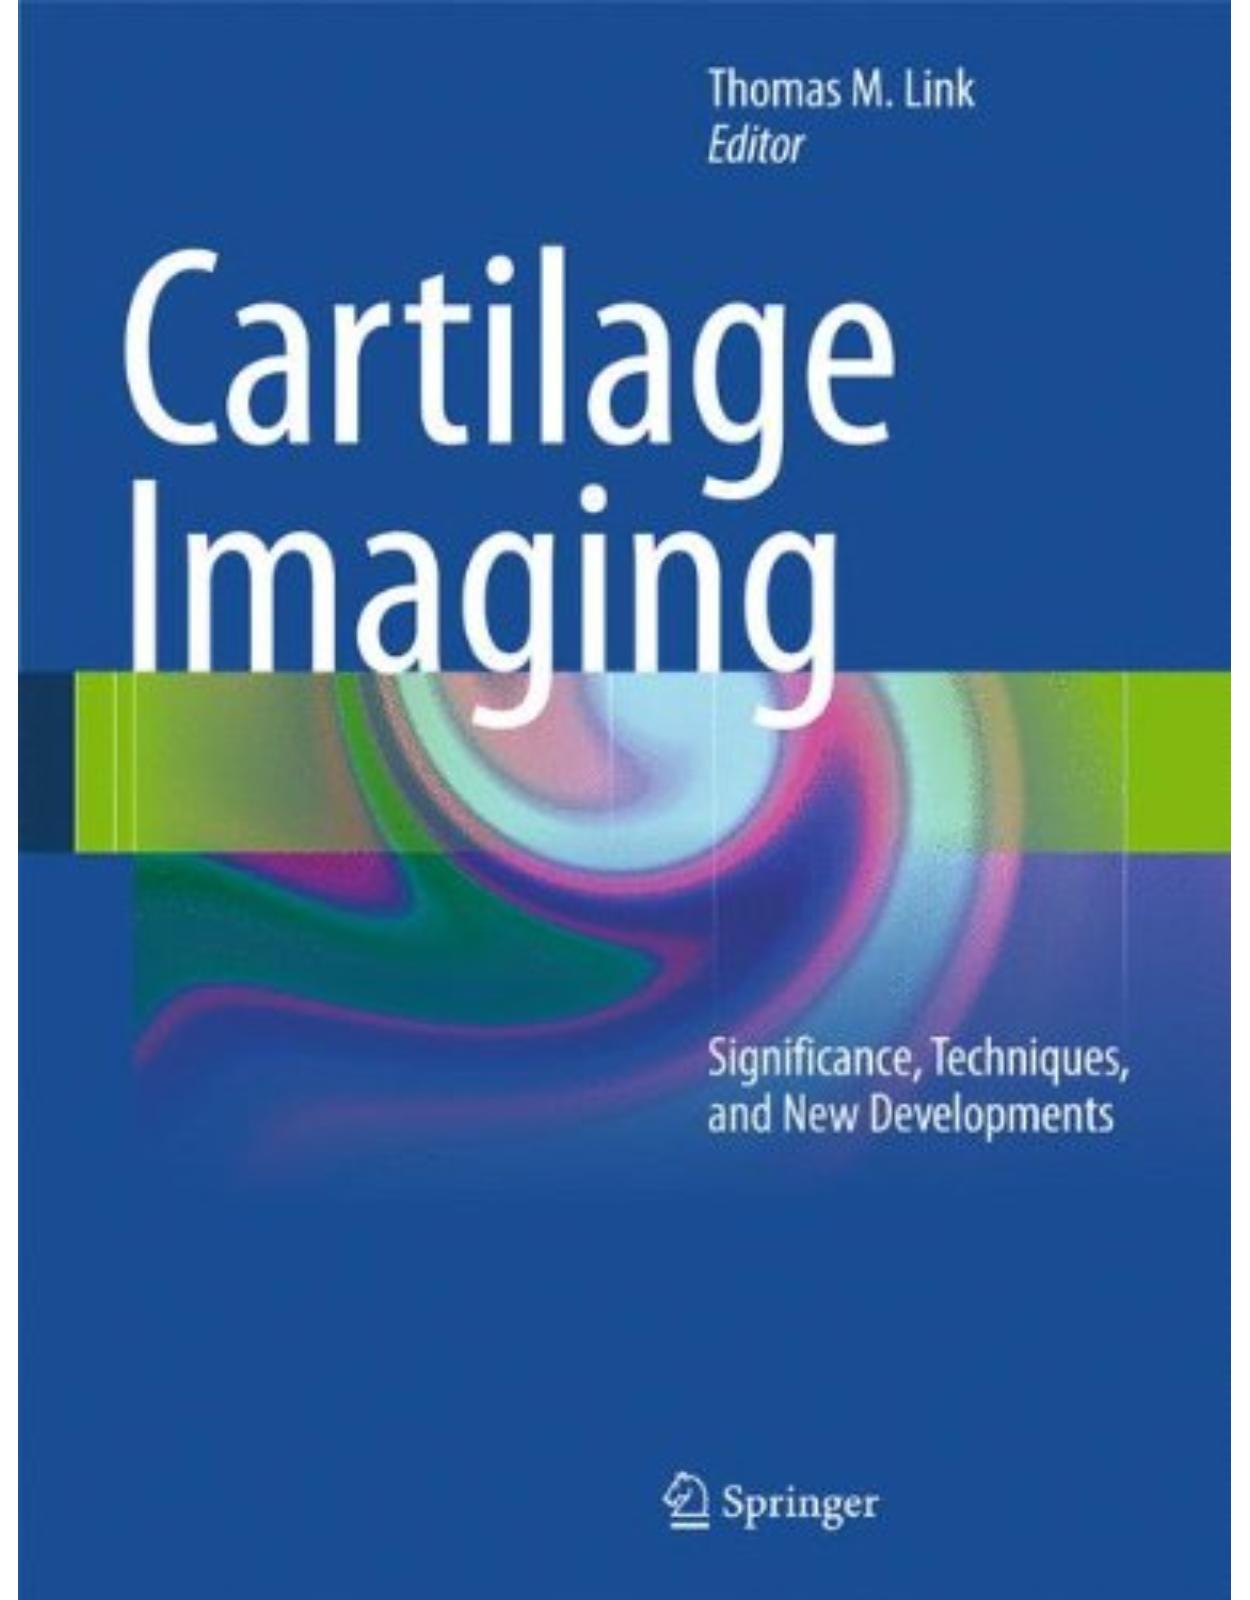 Cartilage Imaging: Significance, Techniques, and New Developments